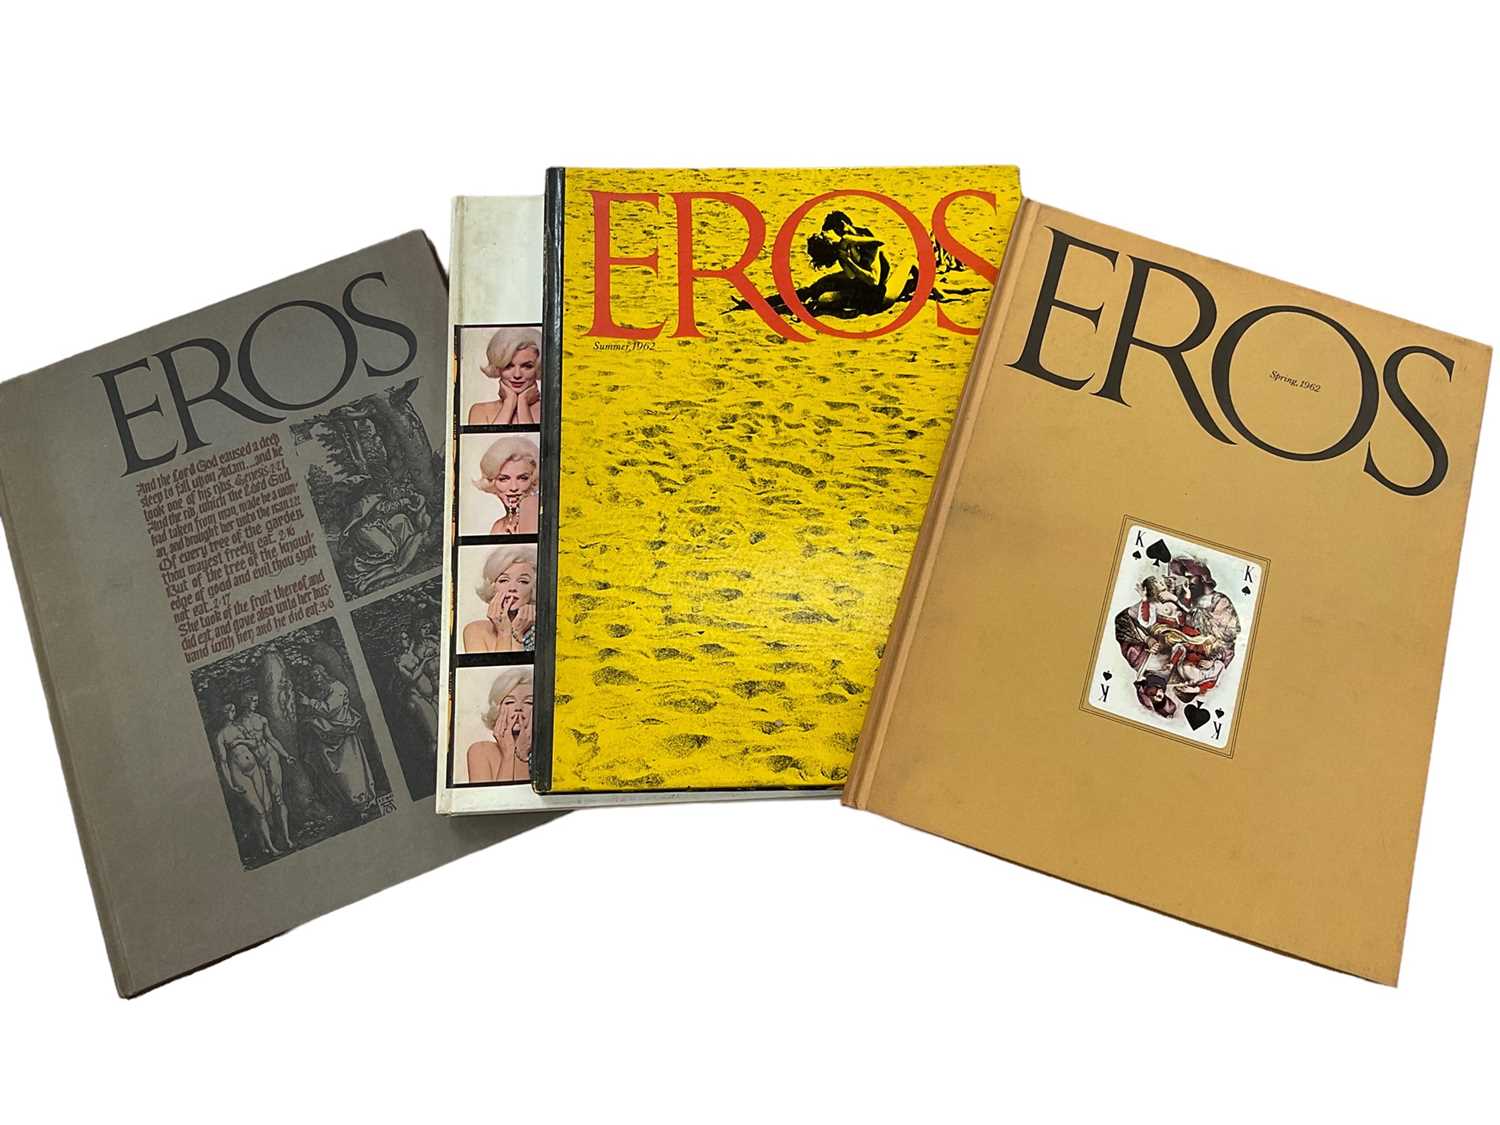 Four books - Eros, 1962, volume 1 numbers 1- 4, edited by Ralph Ginzburg